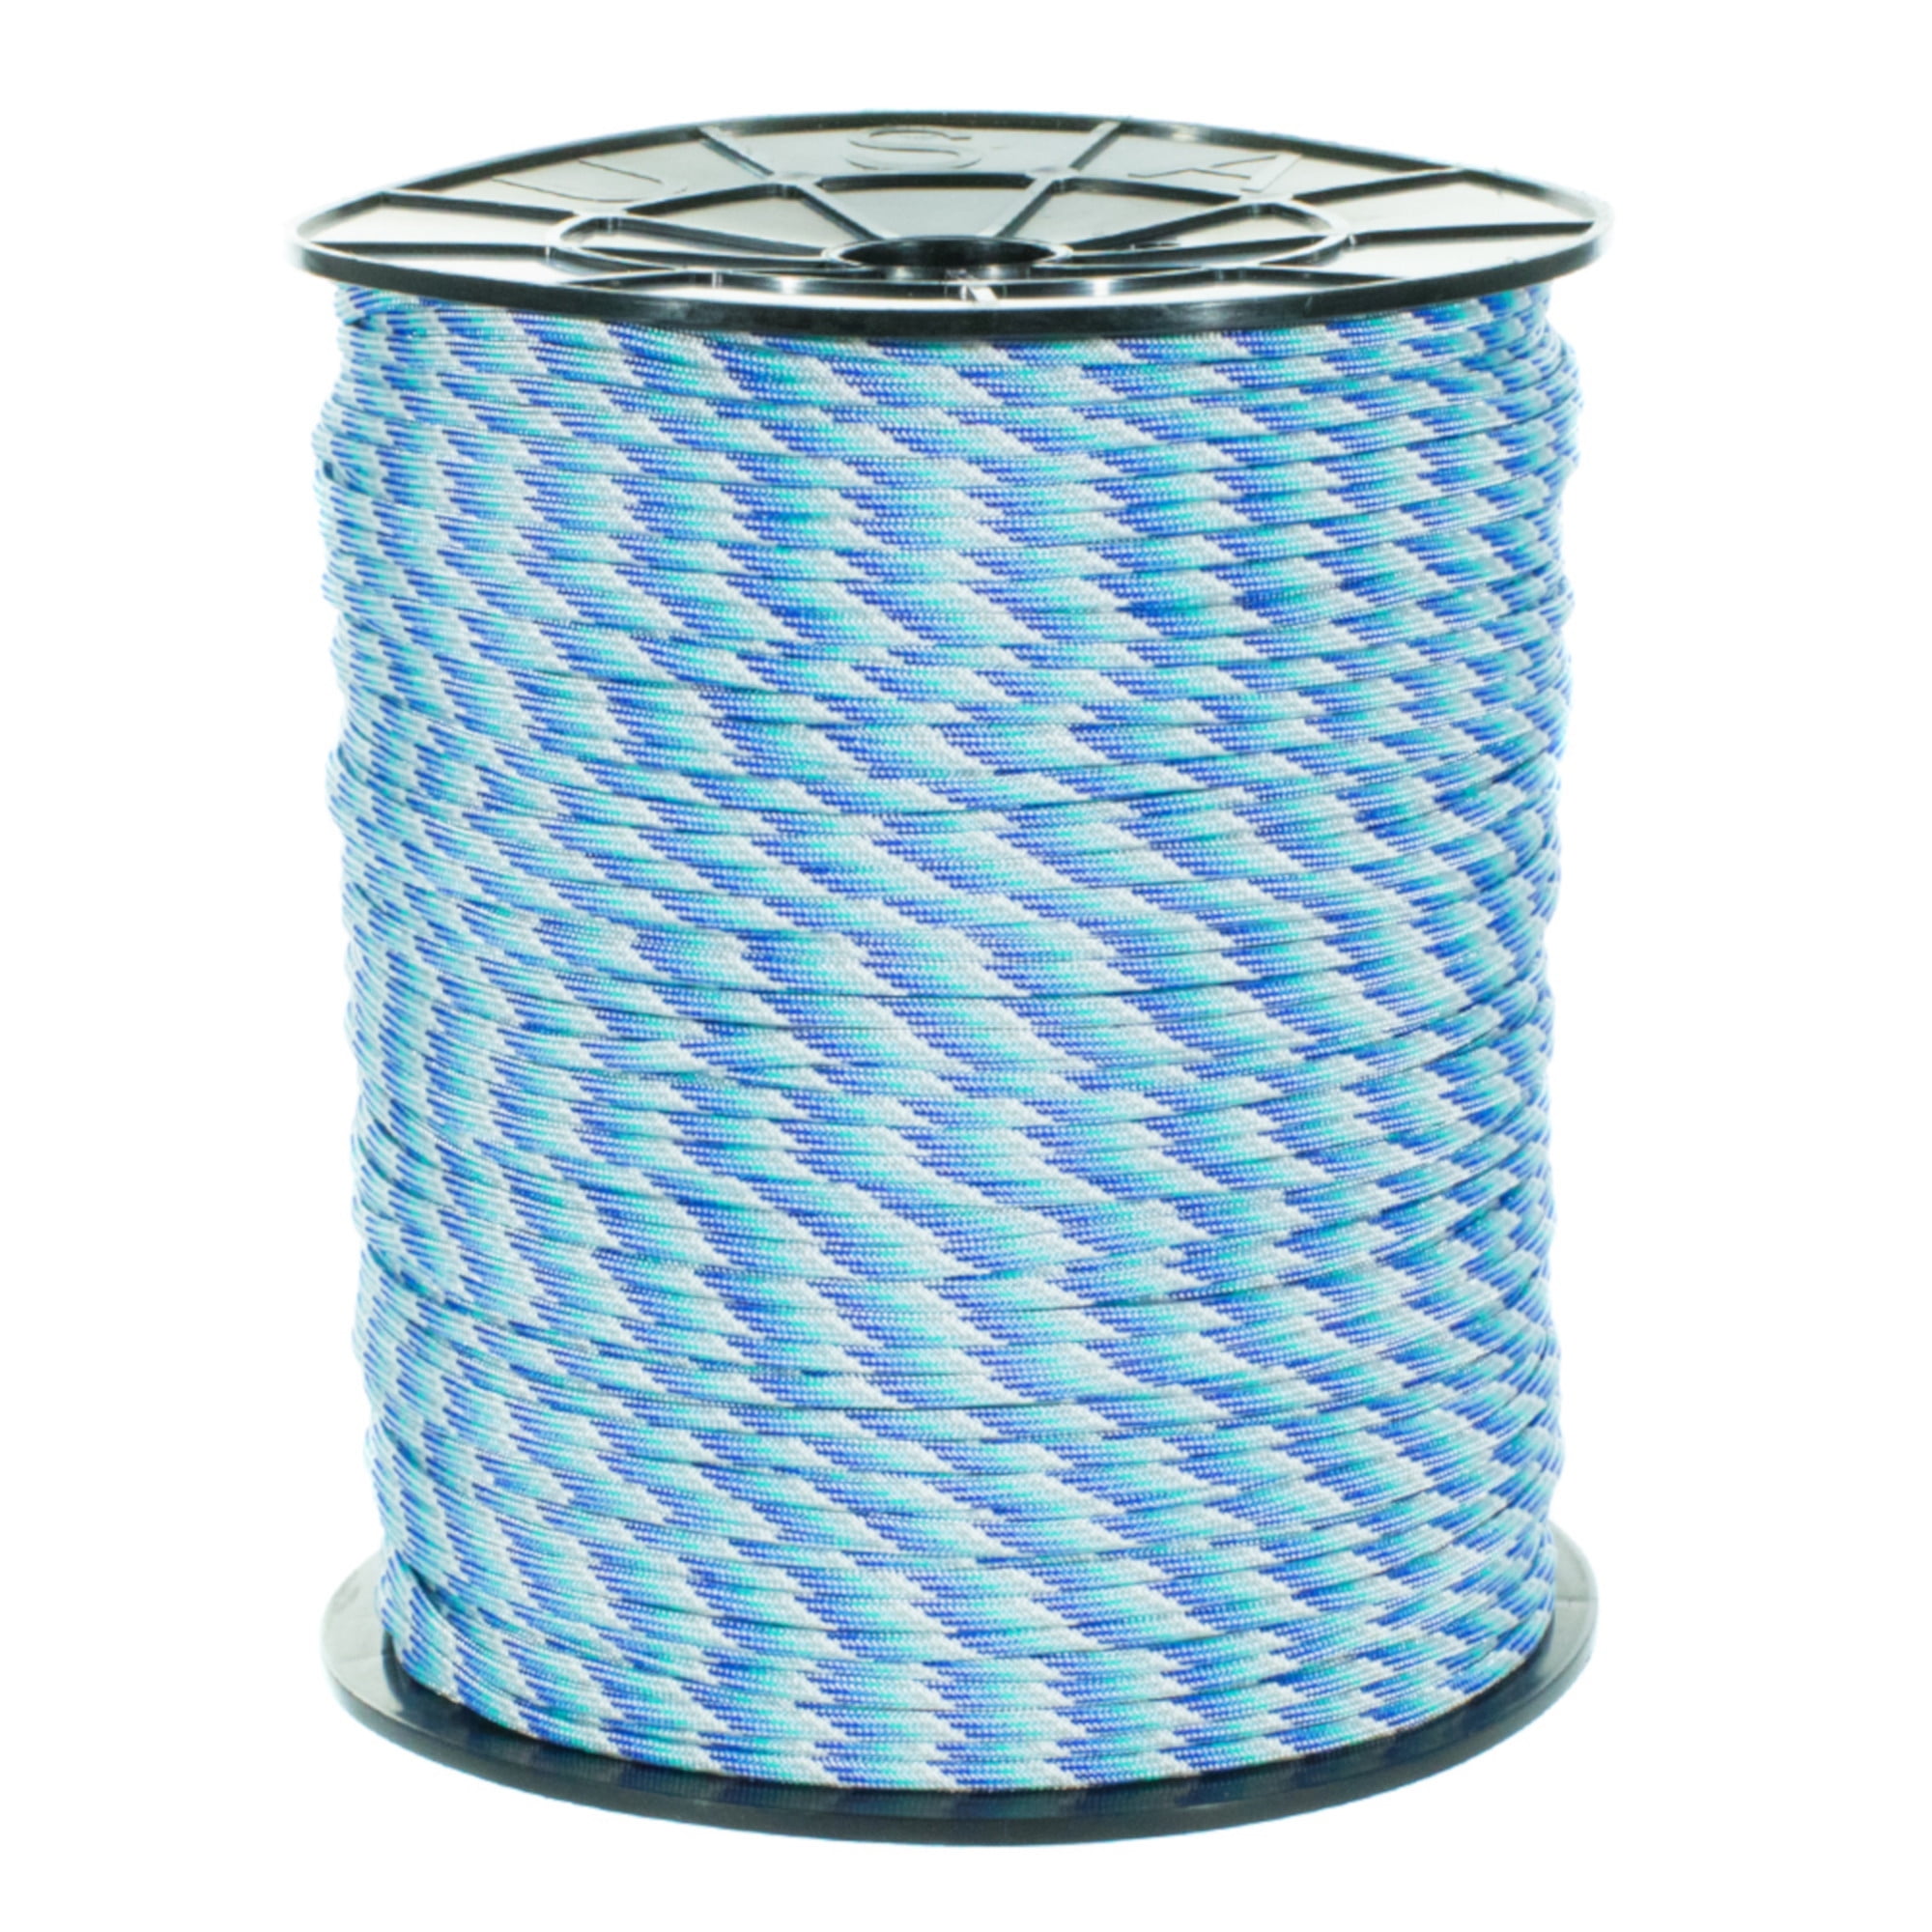 Paracord Planet Nylon 550lb Type III 7 Strand Paracord Made in the U.S.A. 